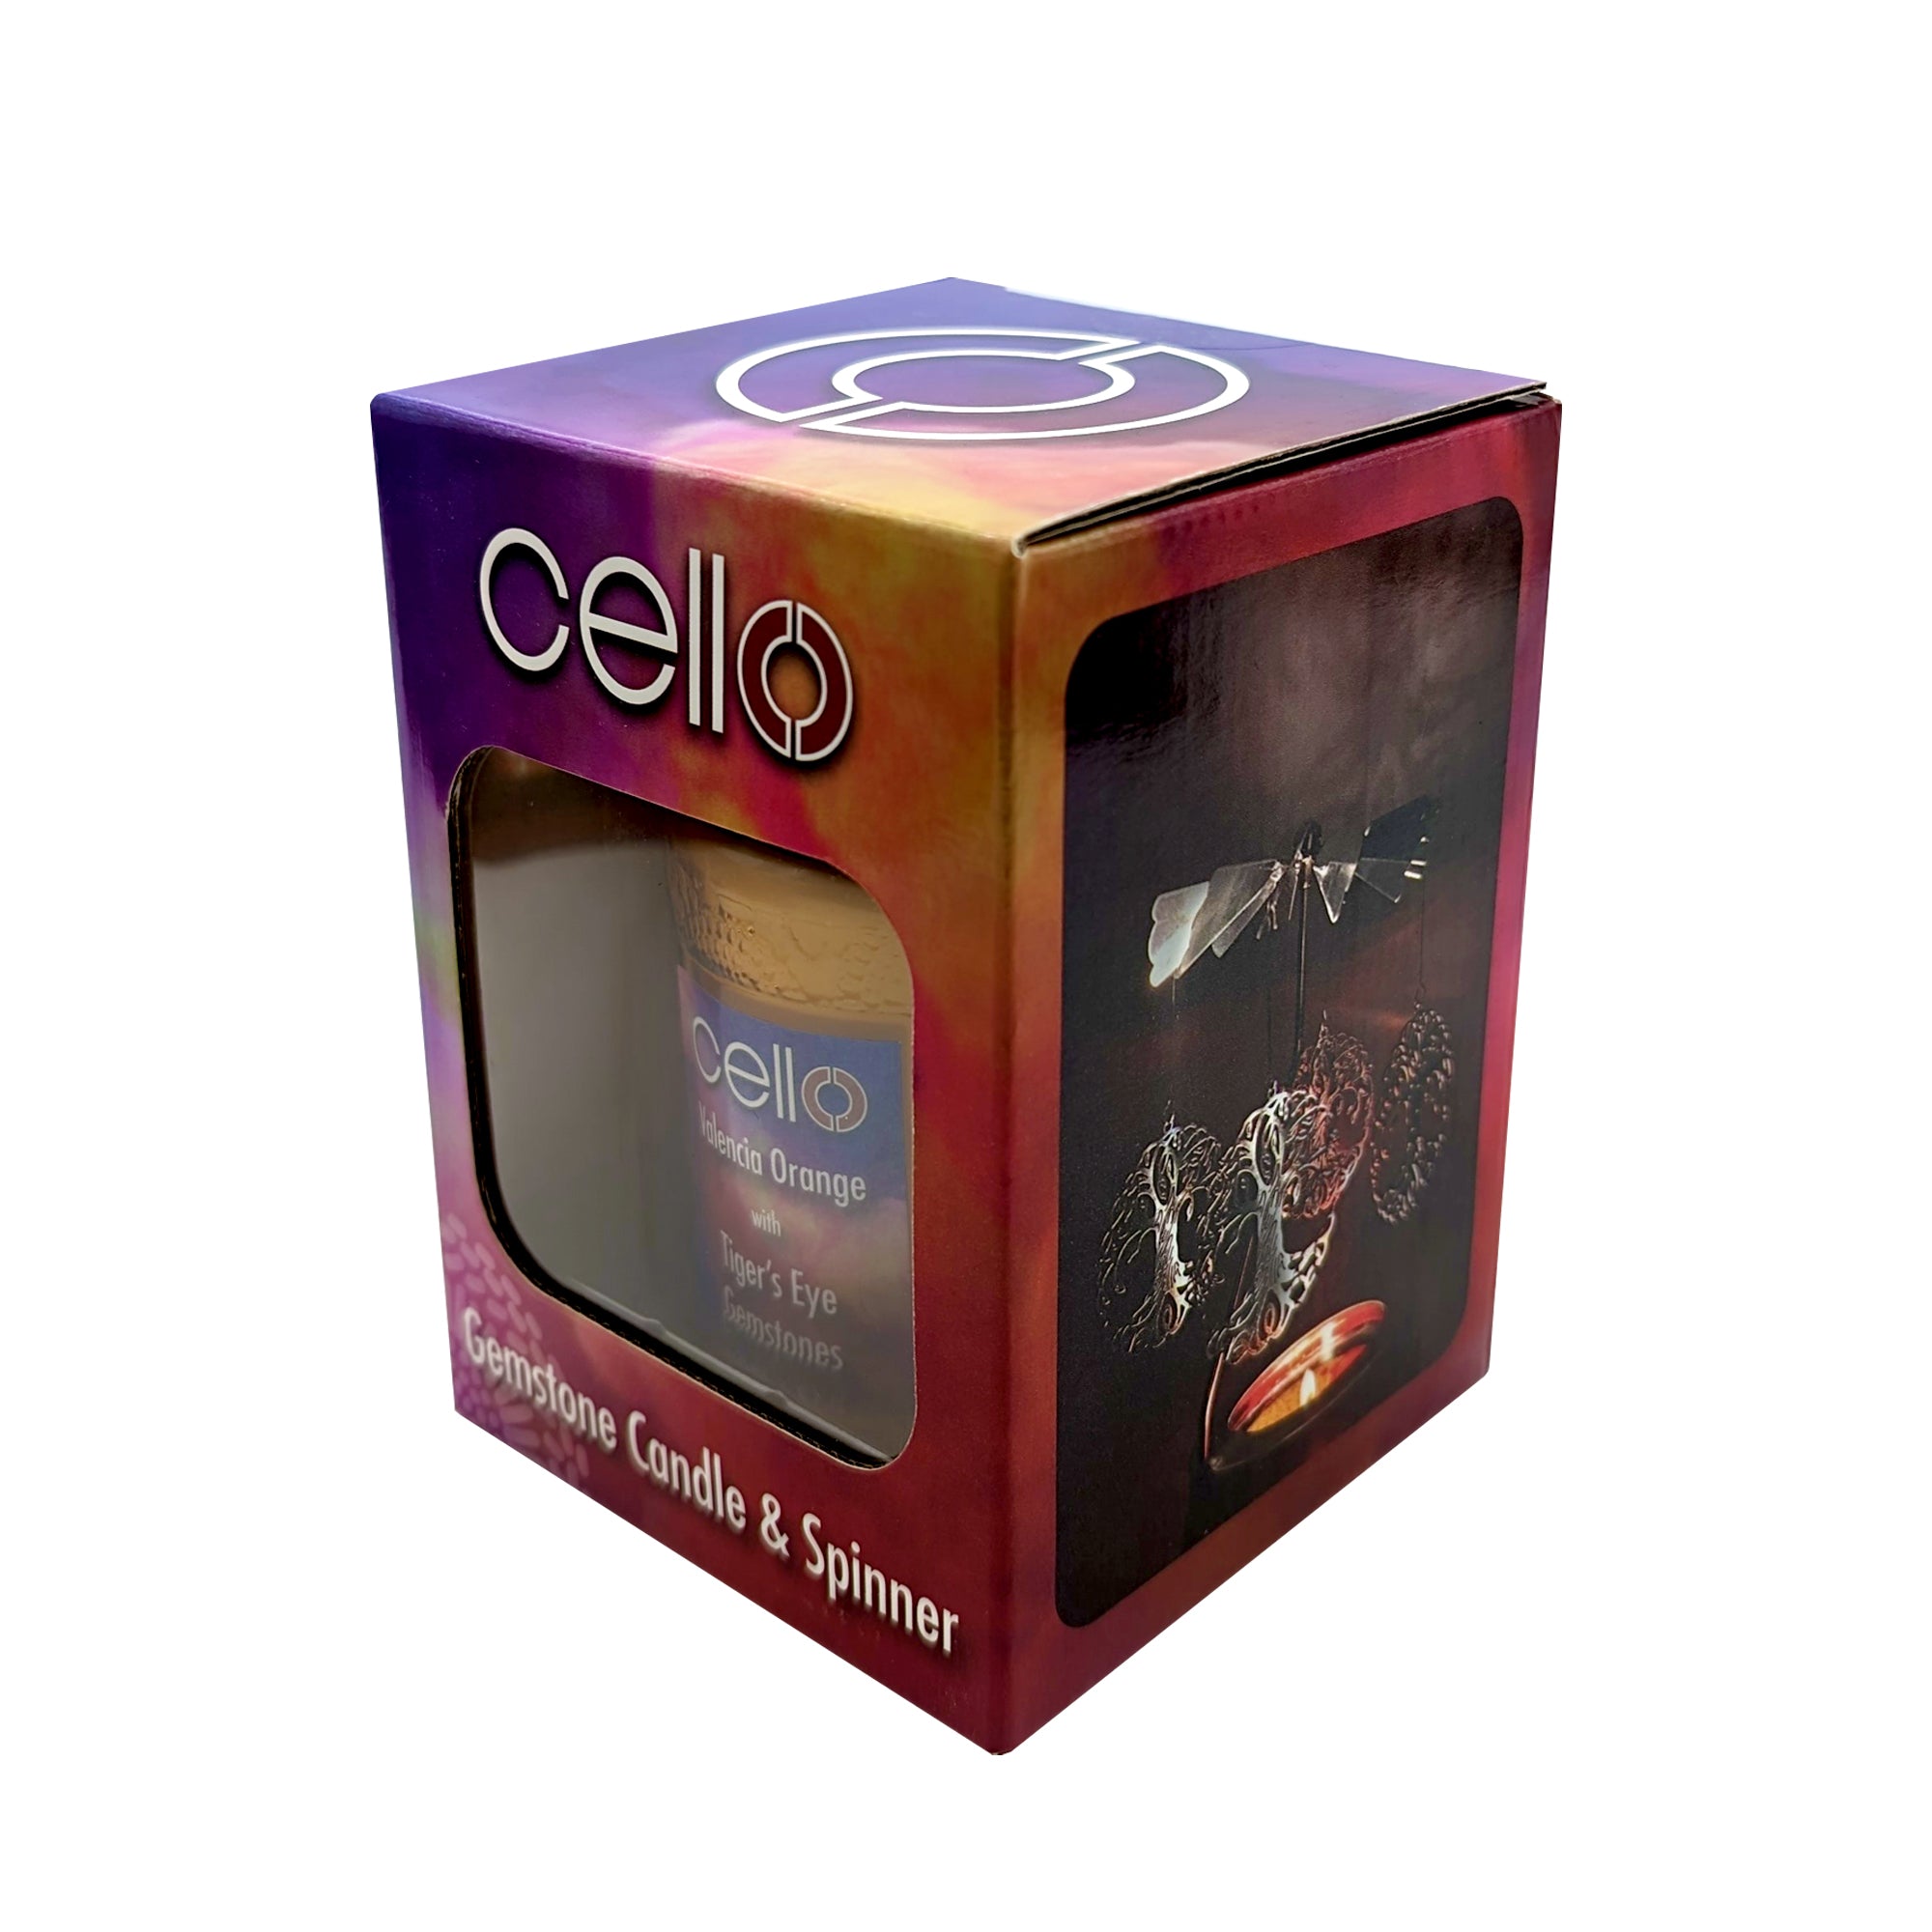 Cello - Gemstone Candle 200g with Convection Spinner - Valencia Orange with Tiger's Eye